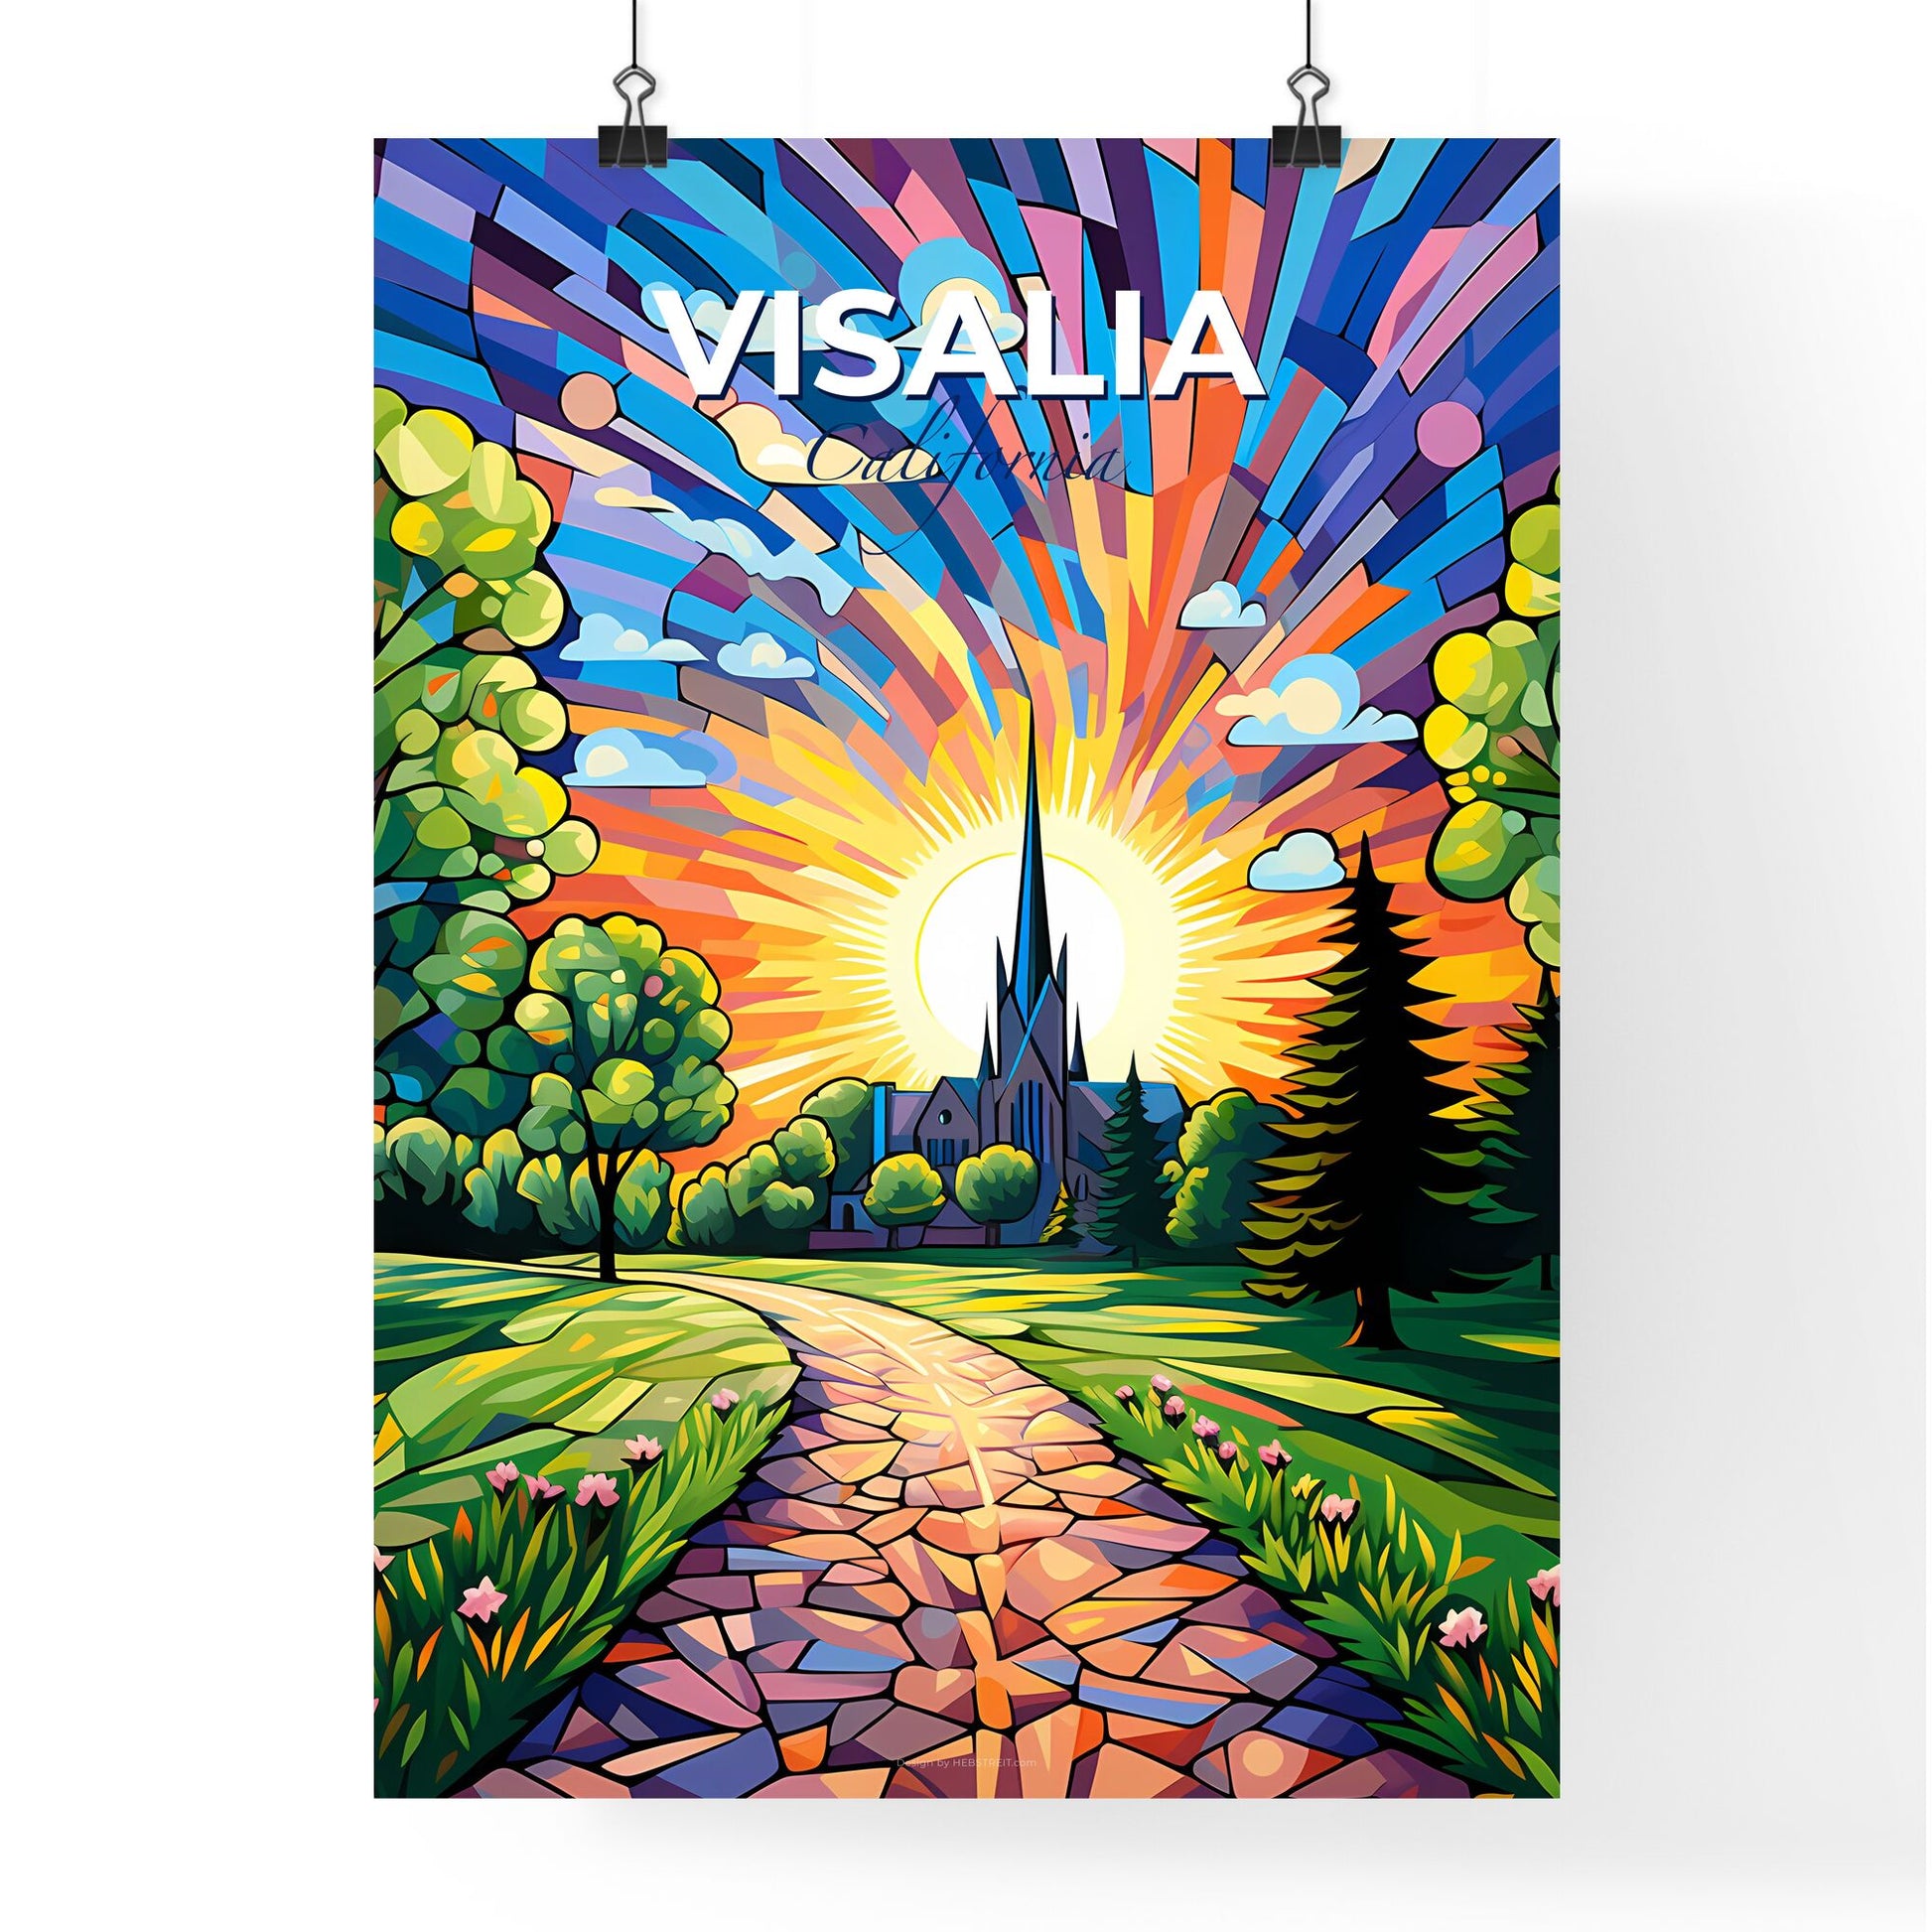 Visalia, California, A Poster of a colorful painting of a church and a road Default Title